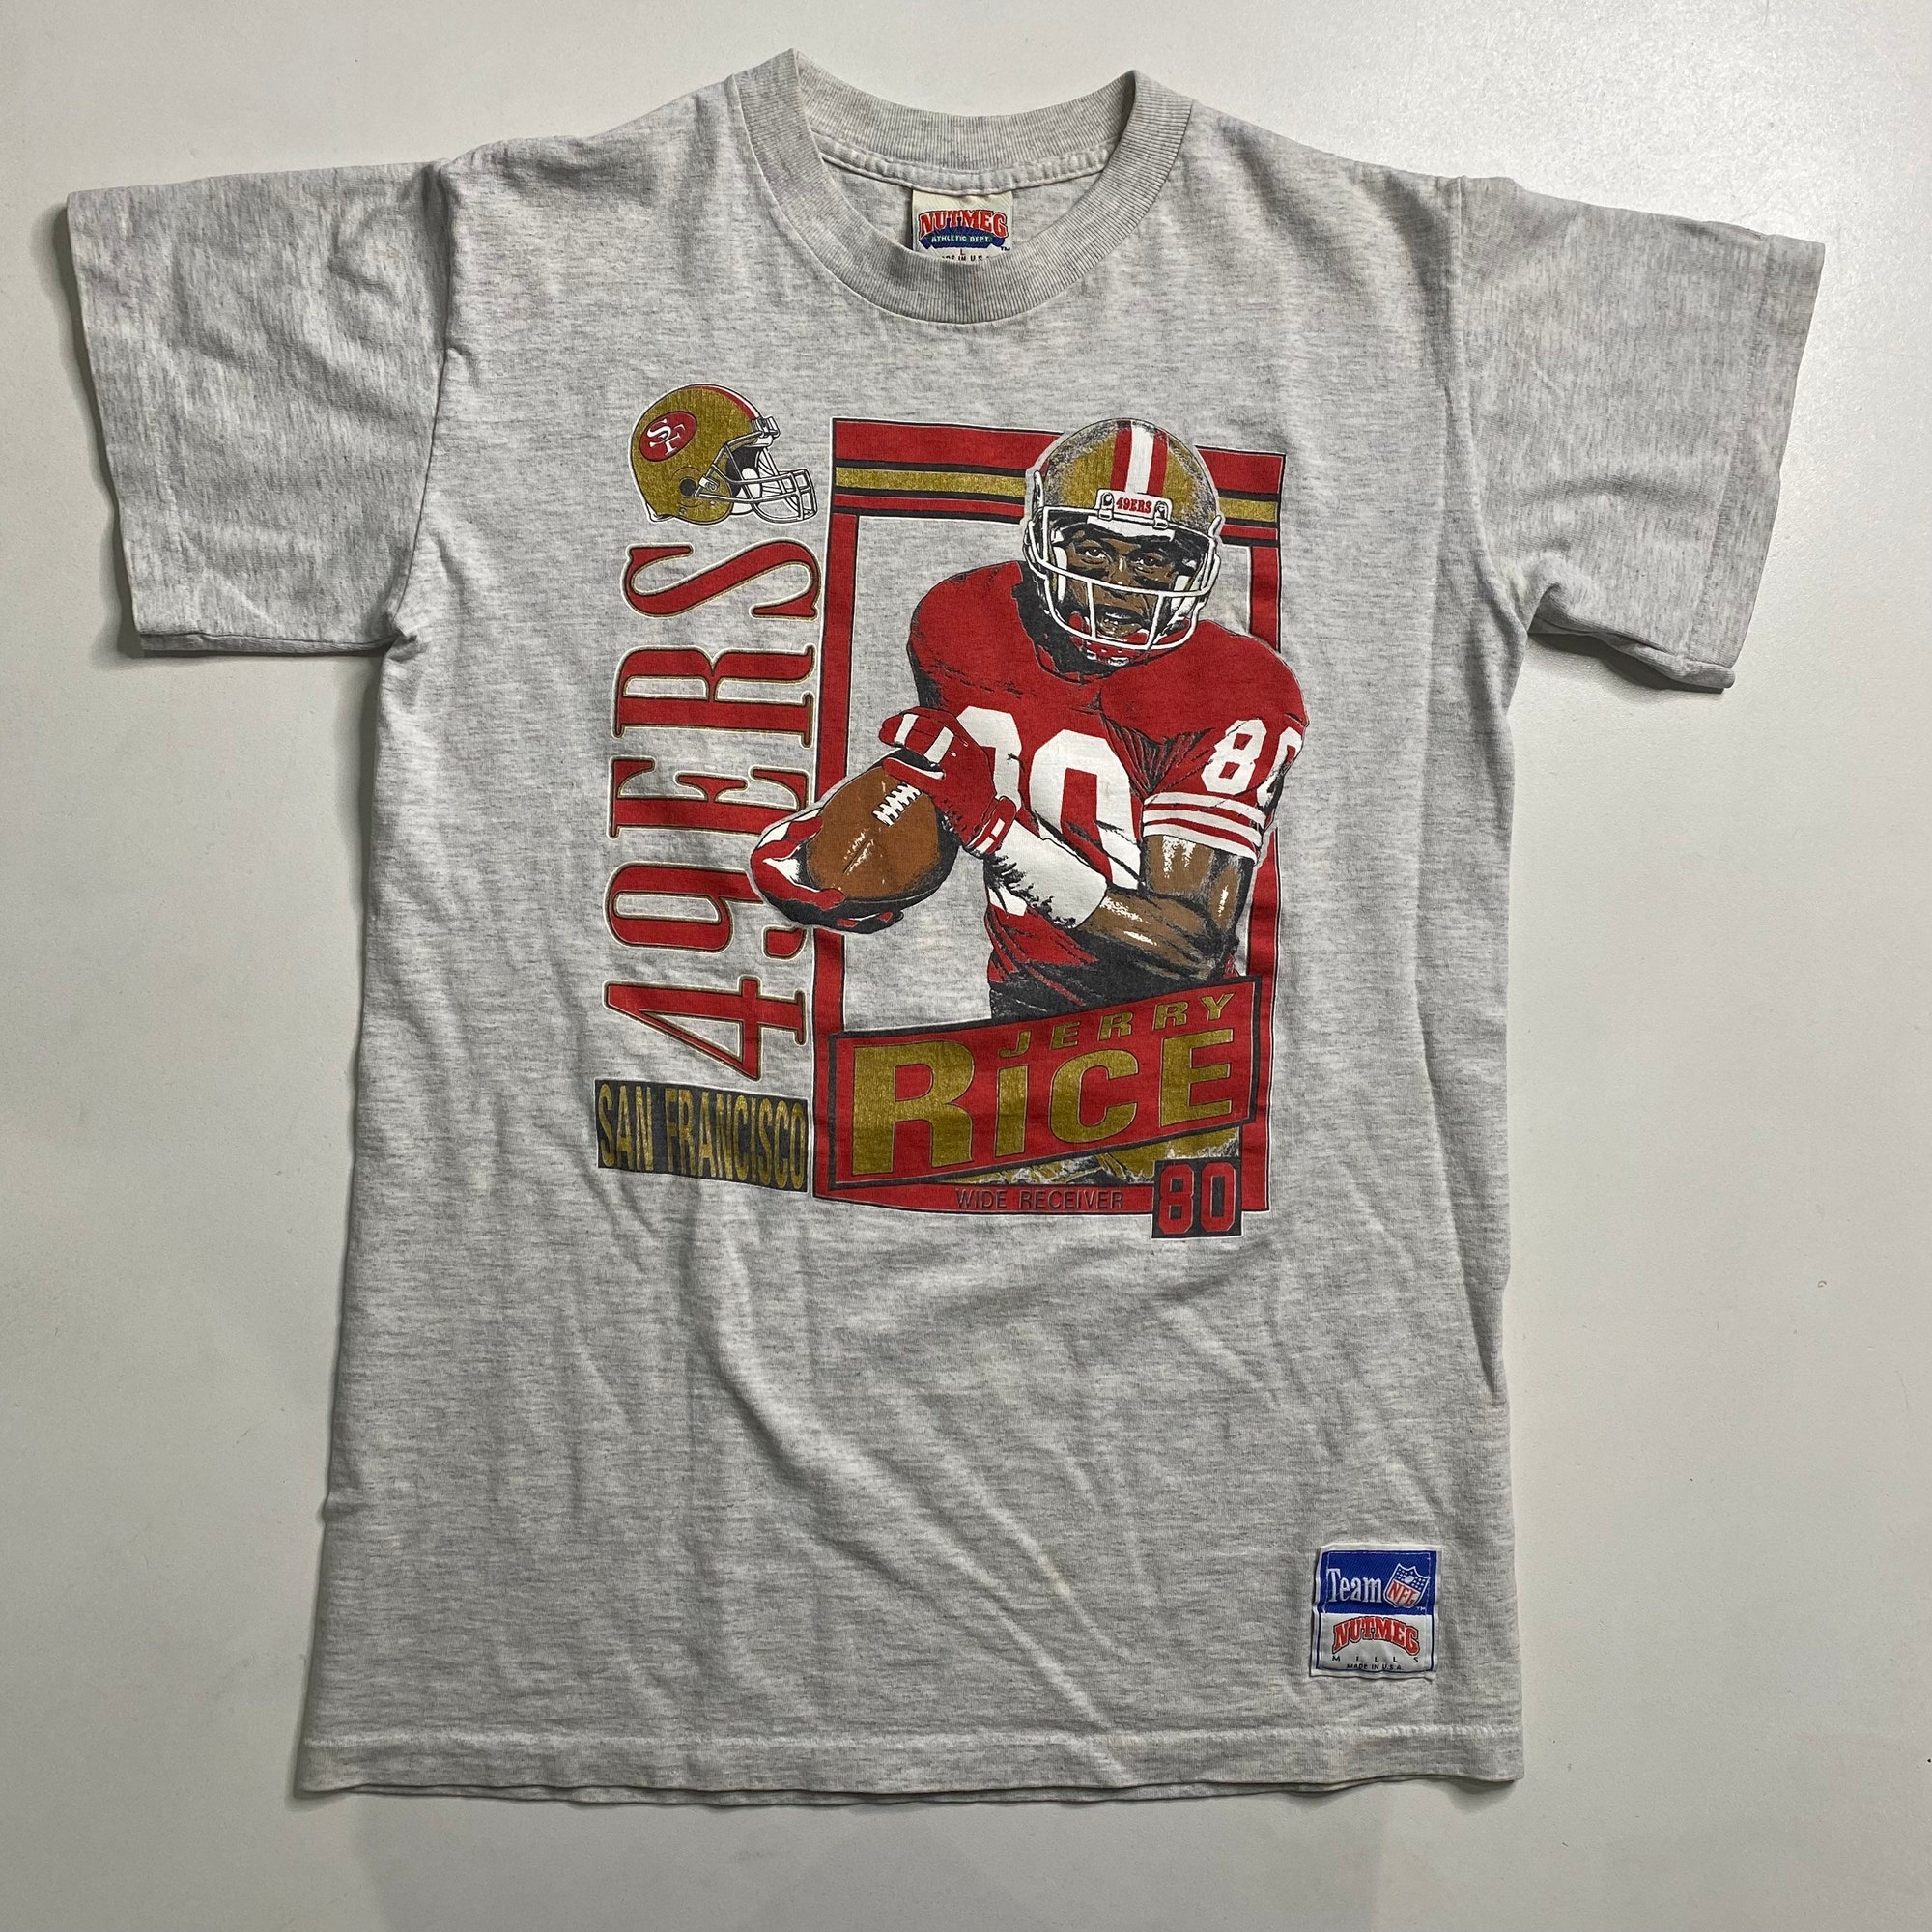 Discover 1991 Jerry Rice 49ers Stats T-shirt